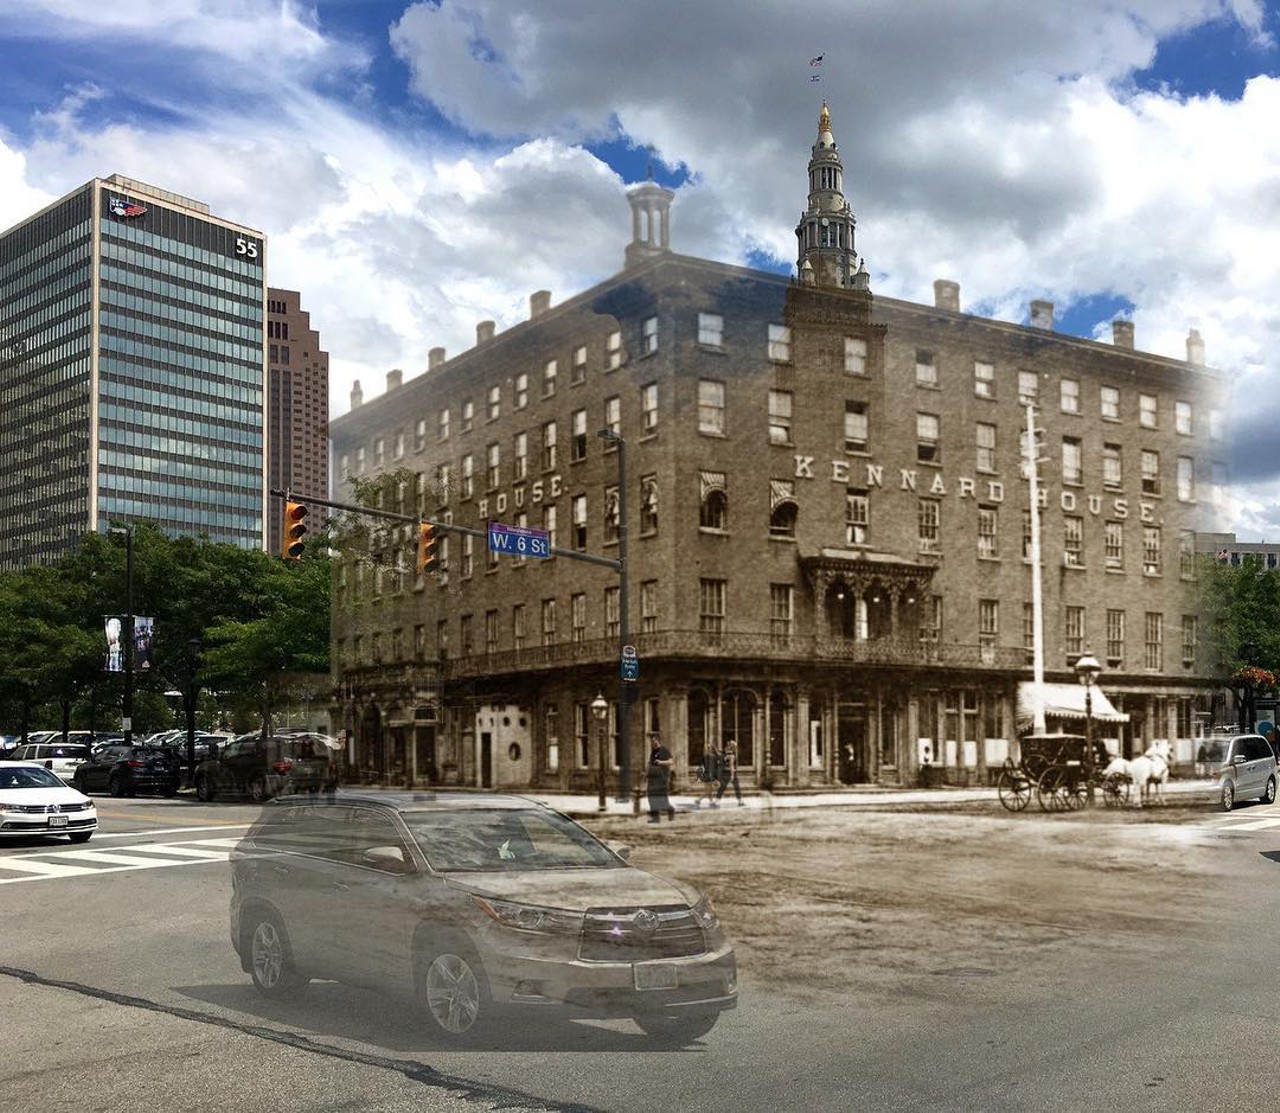 Cleveland, 1870s/2016 - Kennard House hotel on Bank St (W. 6th) and St. Clair.